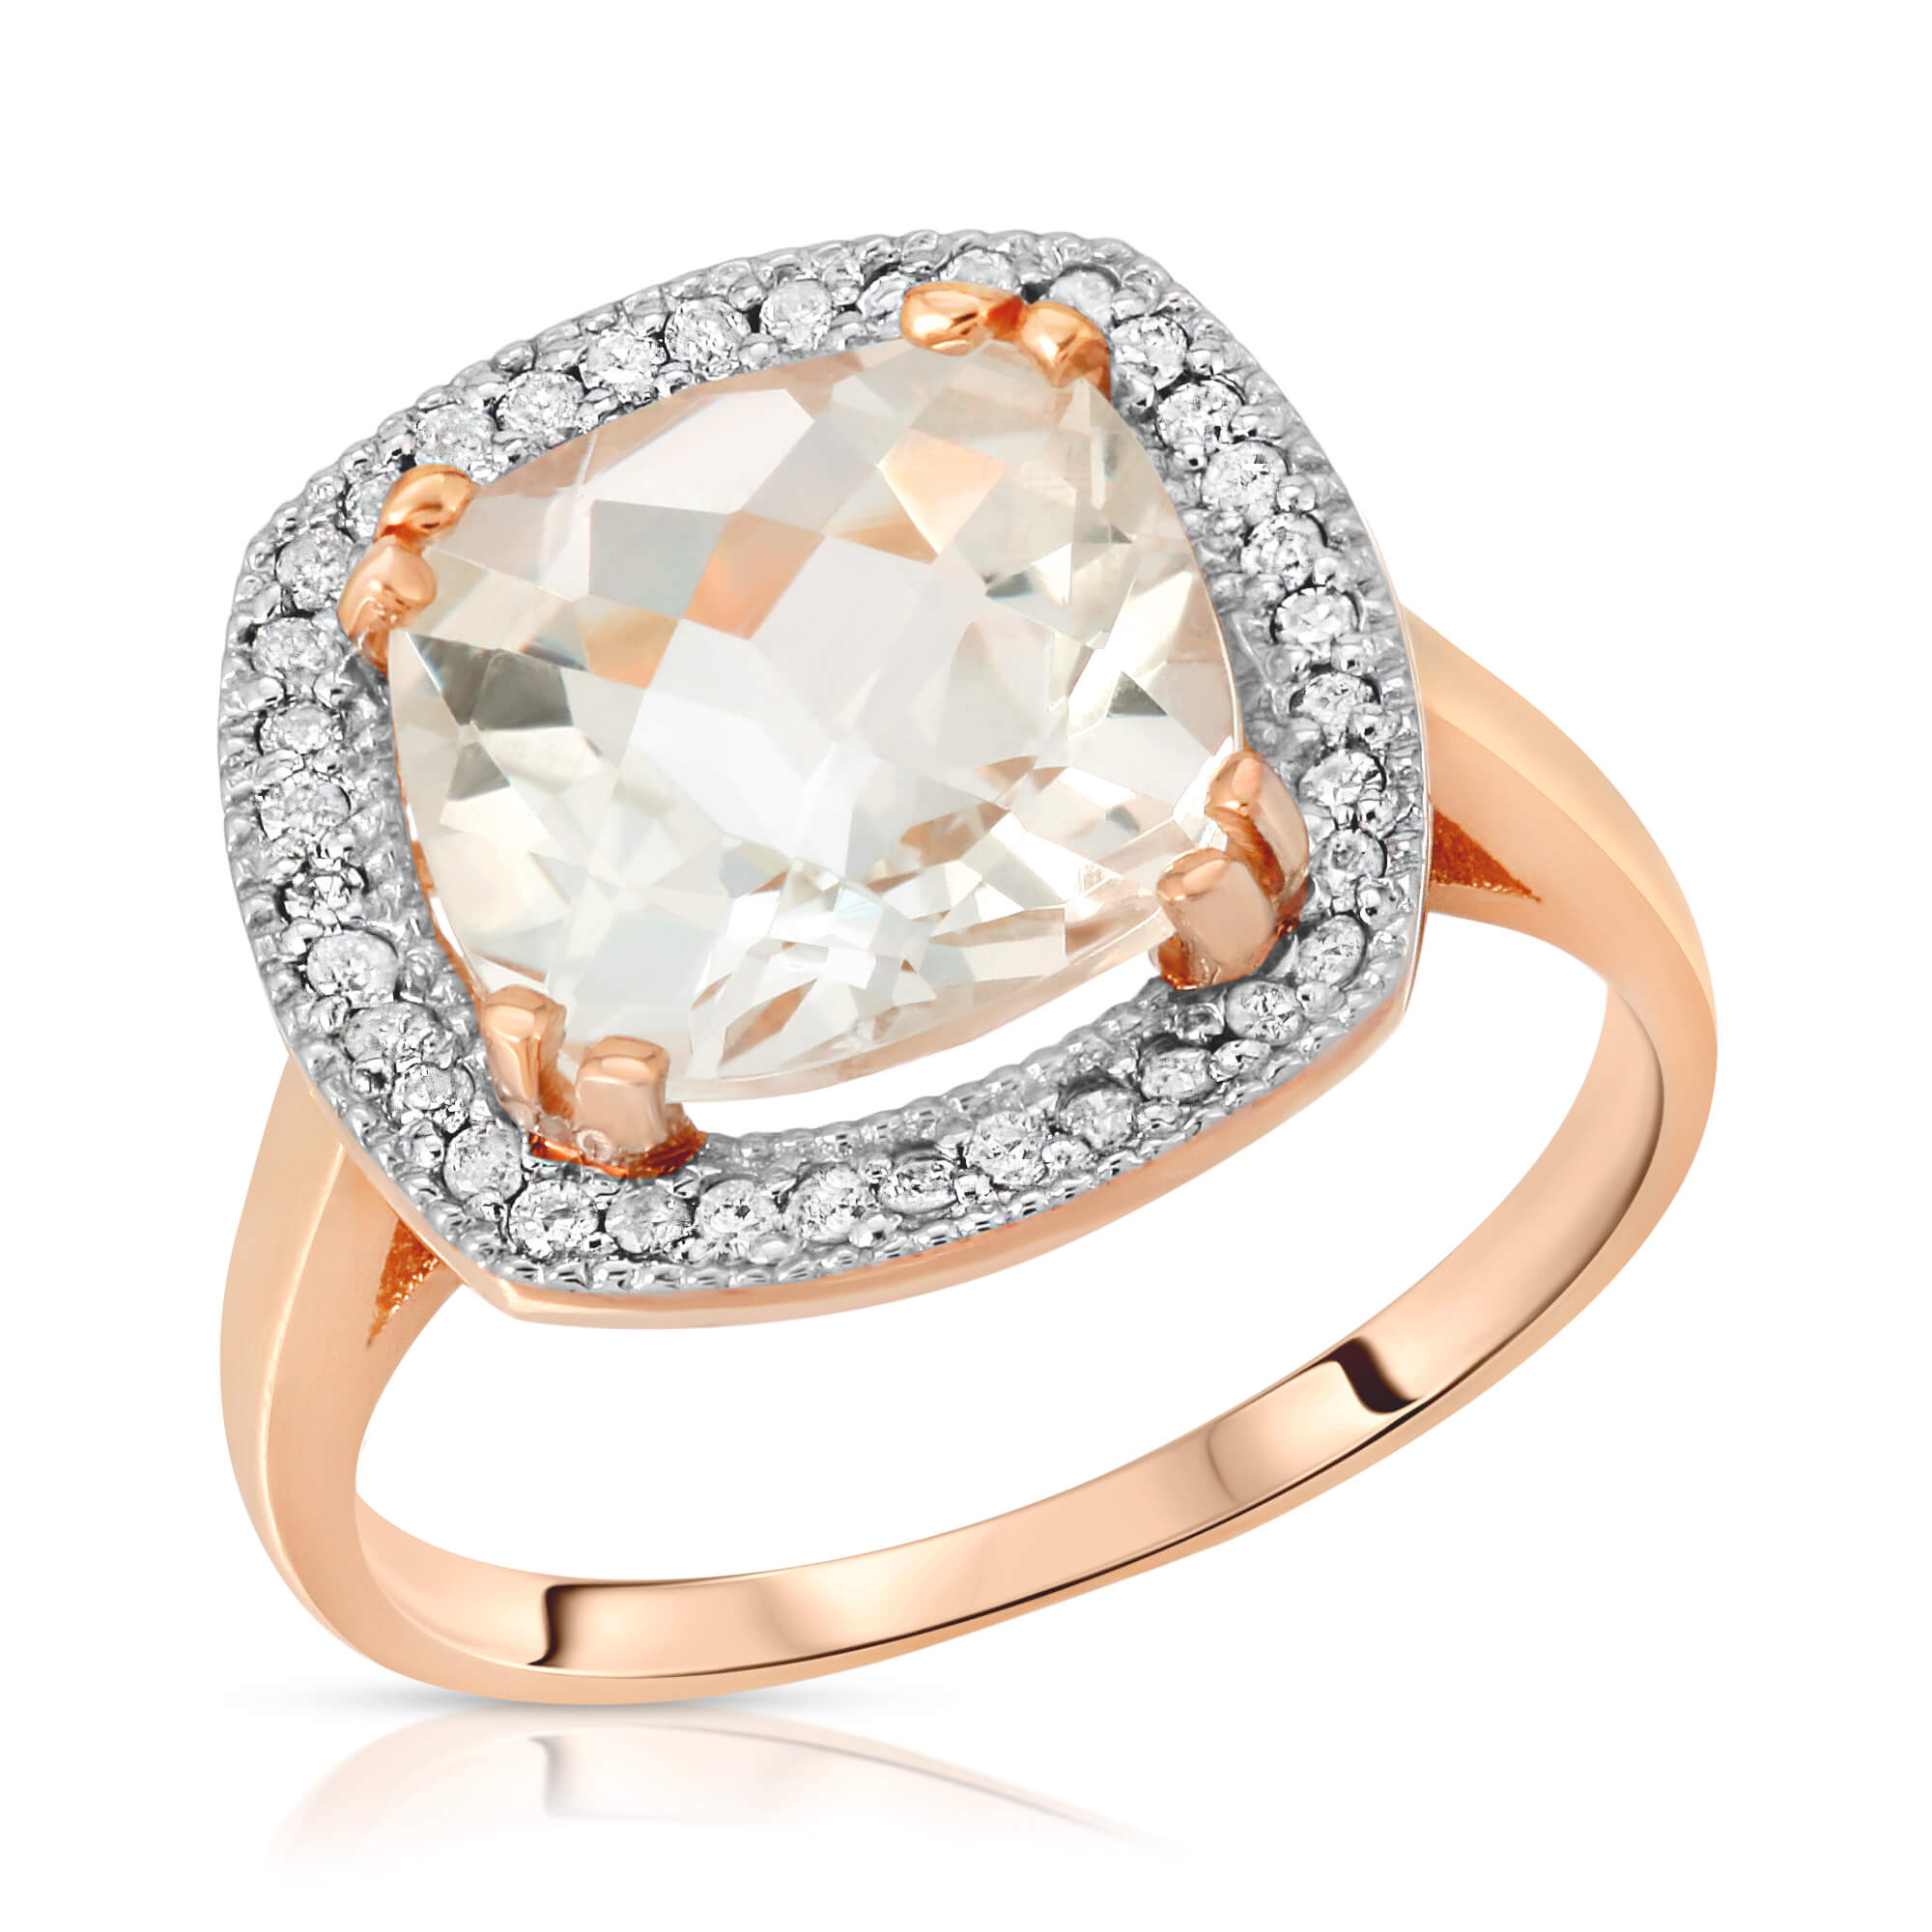 Cushion Cut White Topaz Ring 5.2 ctw in 18ct Rose Gold